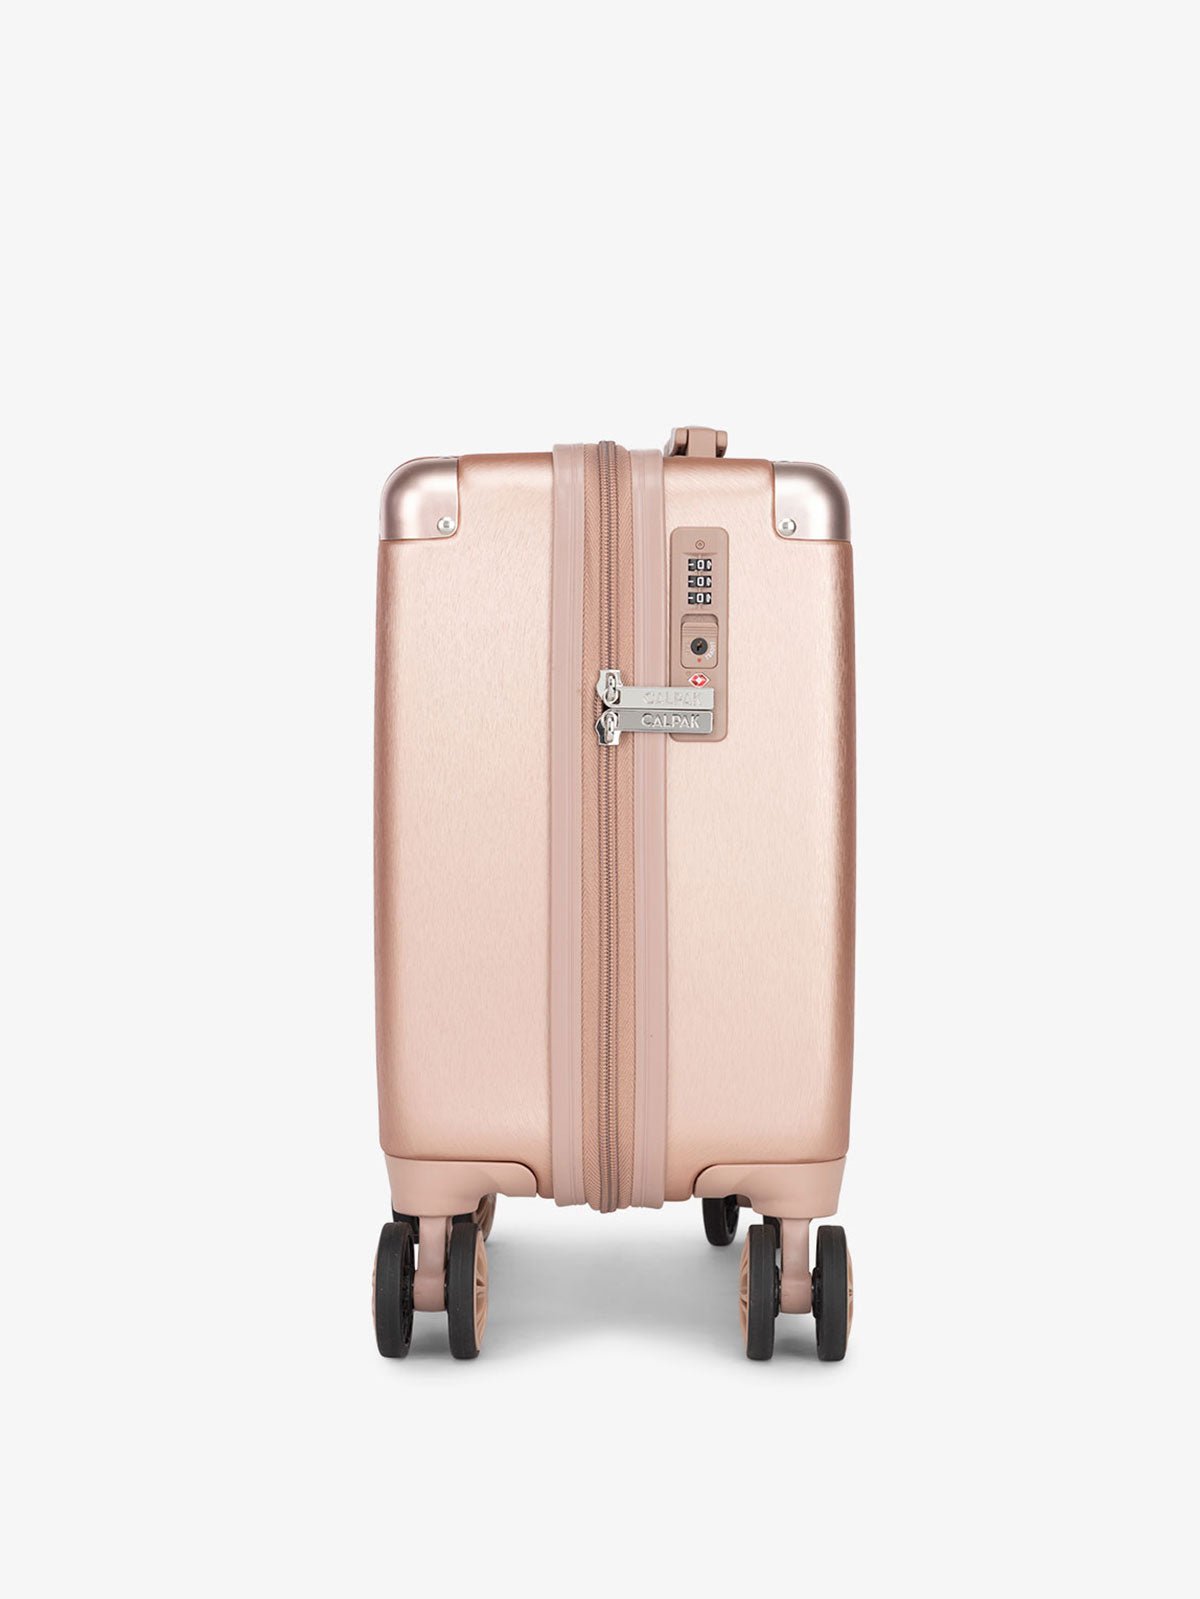 CALPAK Ambuer small suitcase carry on with TSA lock in rose gold